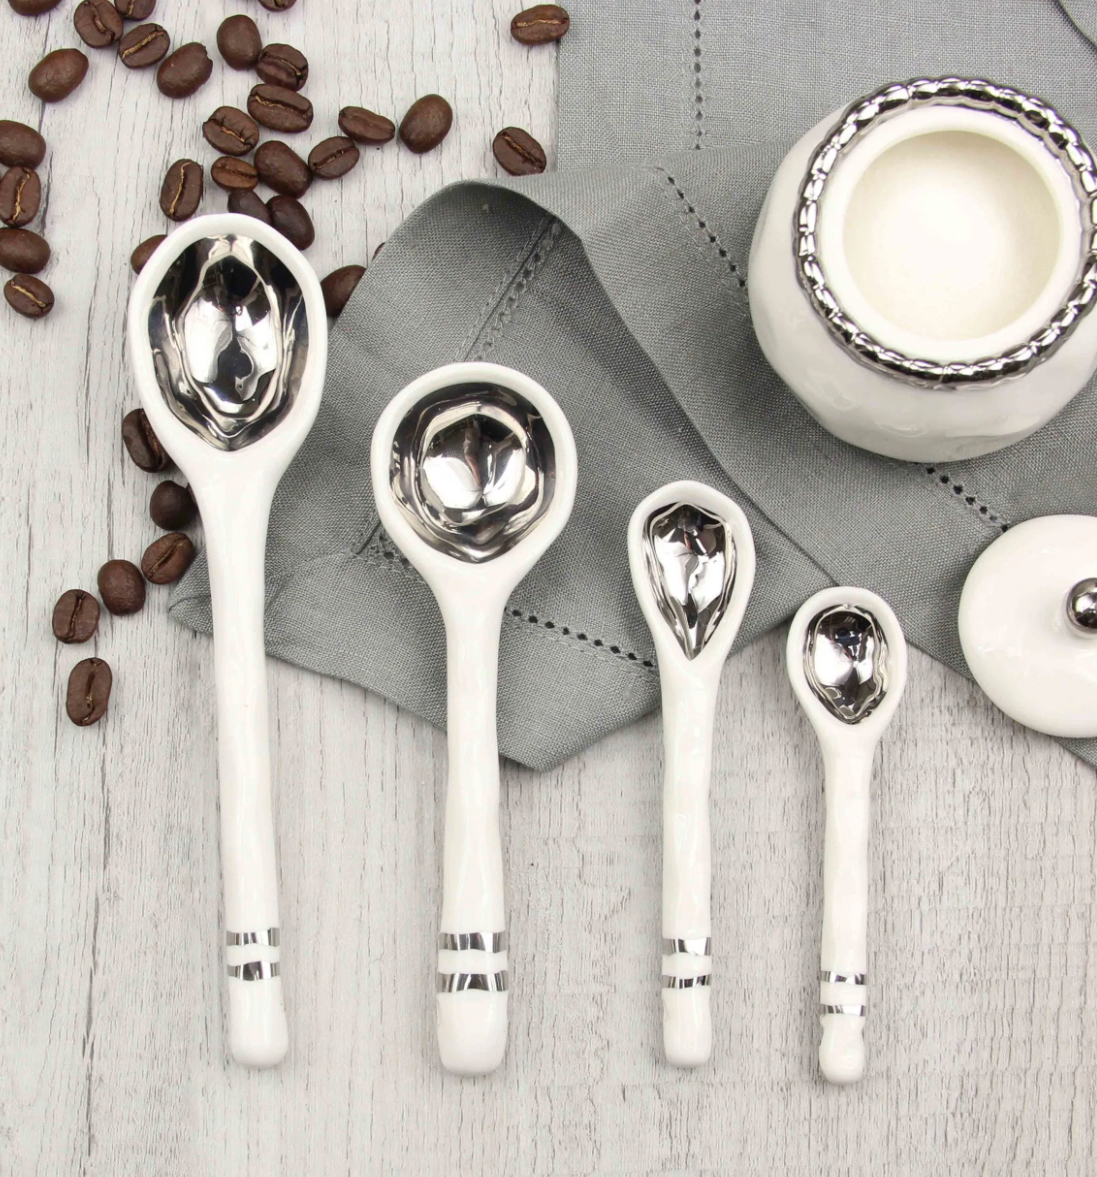 SILVER AND WHITE PORCELAIN SNACK AND SPICE SPOONS (SOLD AS SET OF 4)